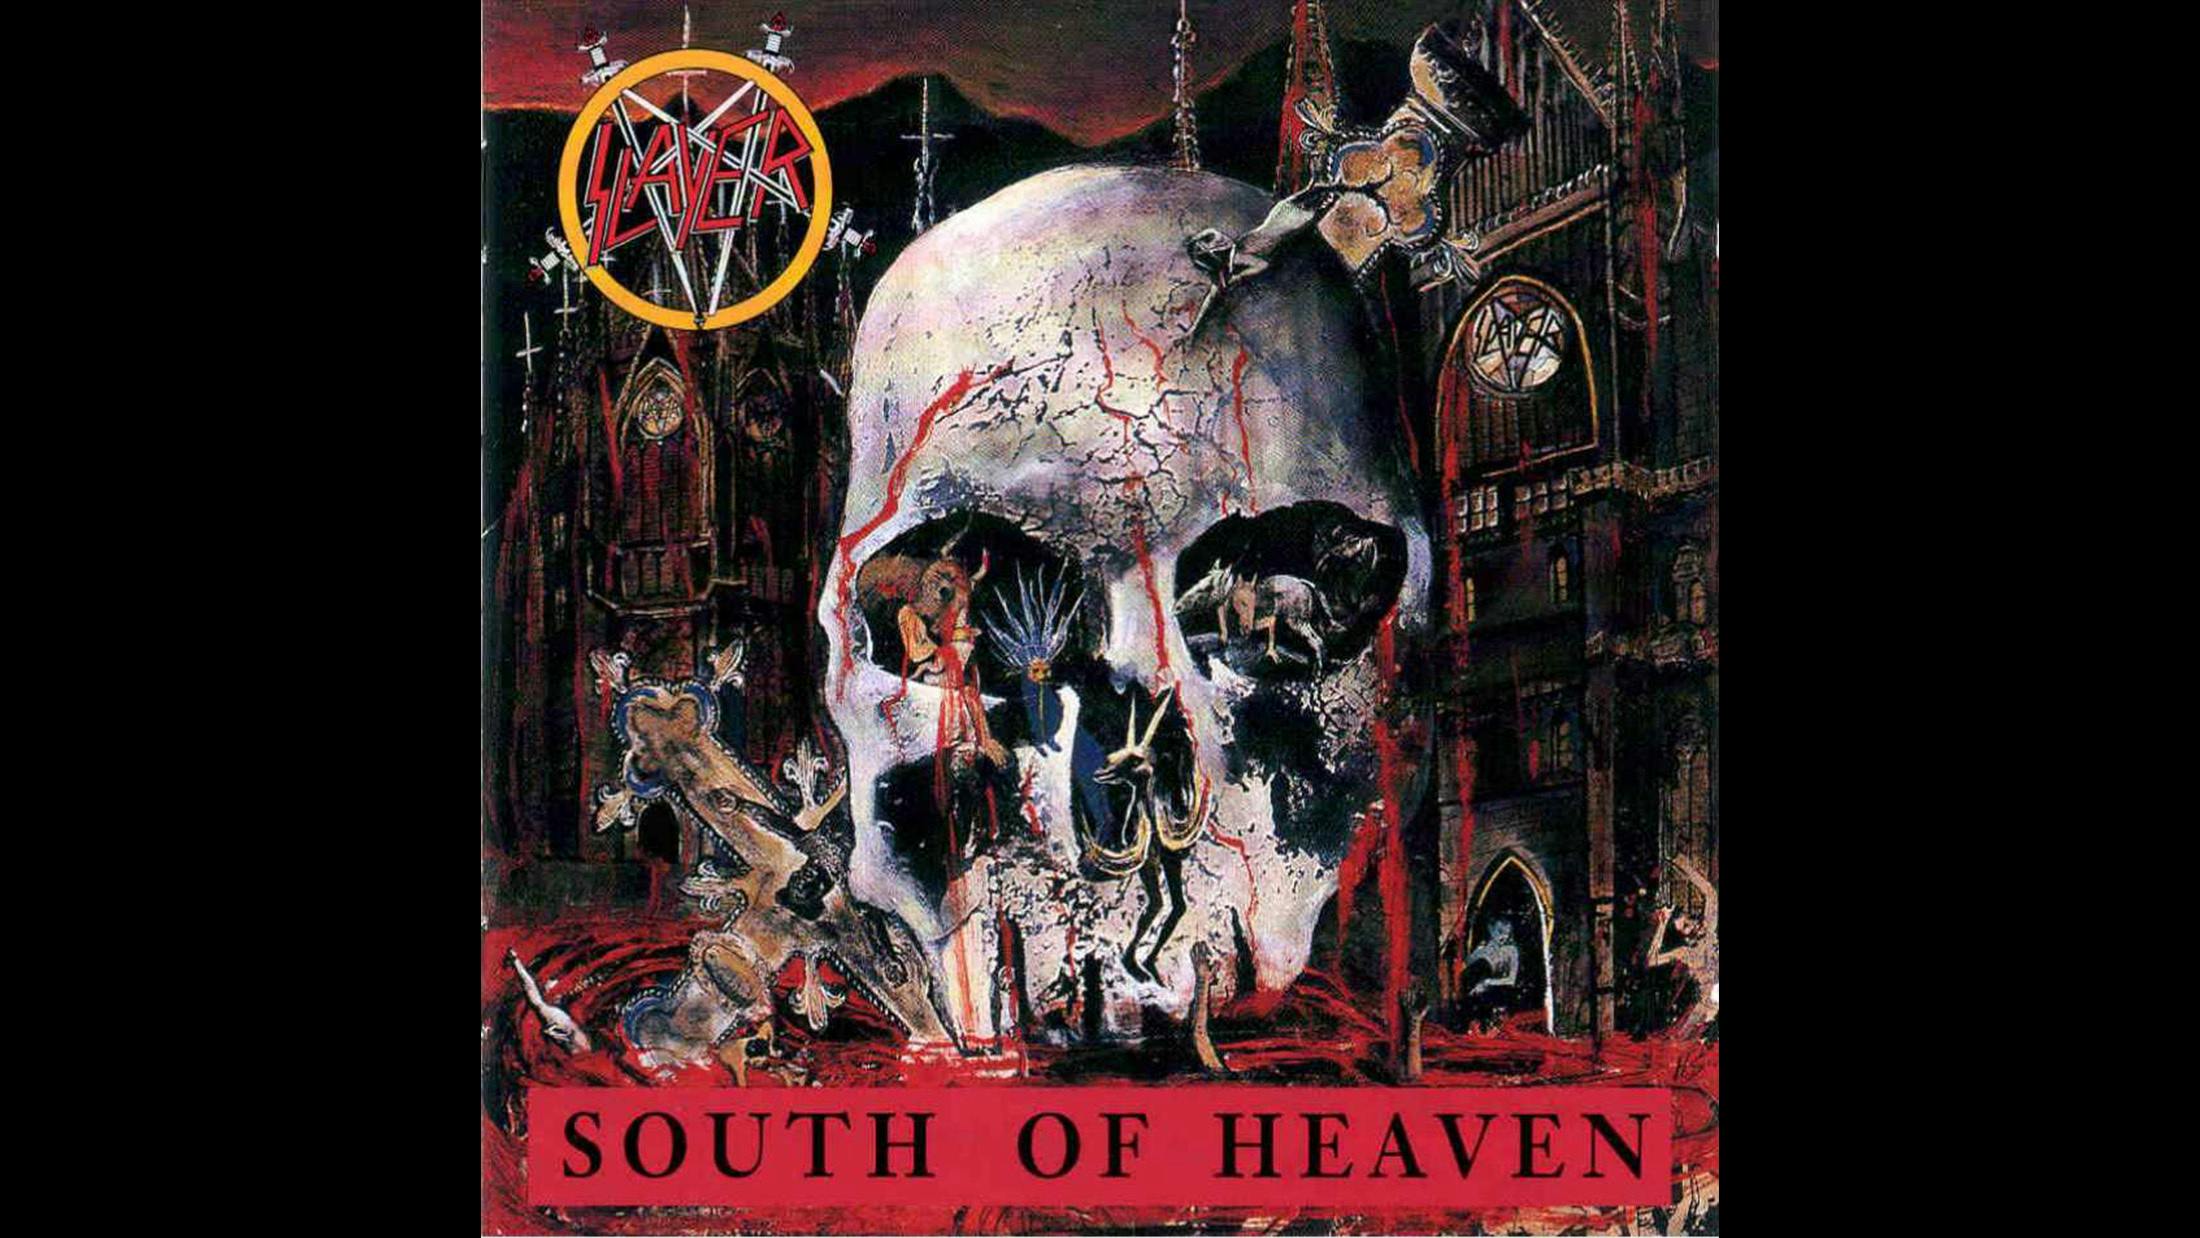 How do you follow an album as savage as Reign In Blood? Surprisingly, Slayer - a band you assumed didn’t have a downward gear shift - slowed things down a bit. The Californian thrashers were aware South Of Heaven would be held up against its critically lauded predecessor, particularly as producer Rick Rubin was once again on board, so they decided to mix things up. The (relative) change of pace meant that the punishing riffs courtesy of Kerry King and Jeff Hanneman, and Tom Araya’s disturbing lyrics, could be felt more acutely.